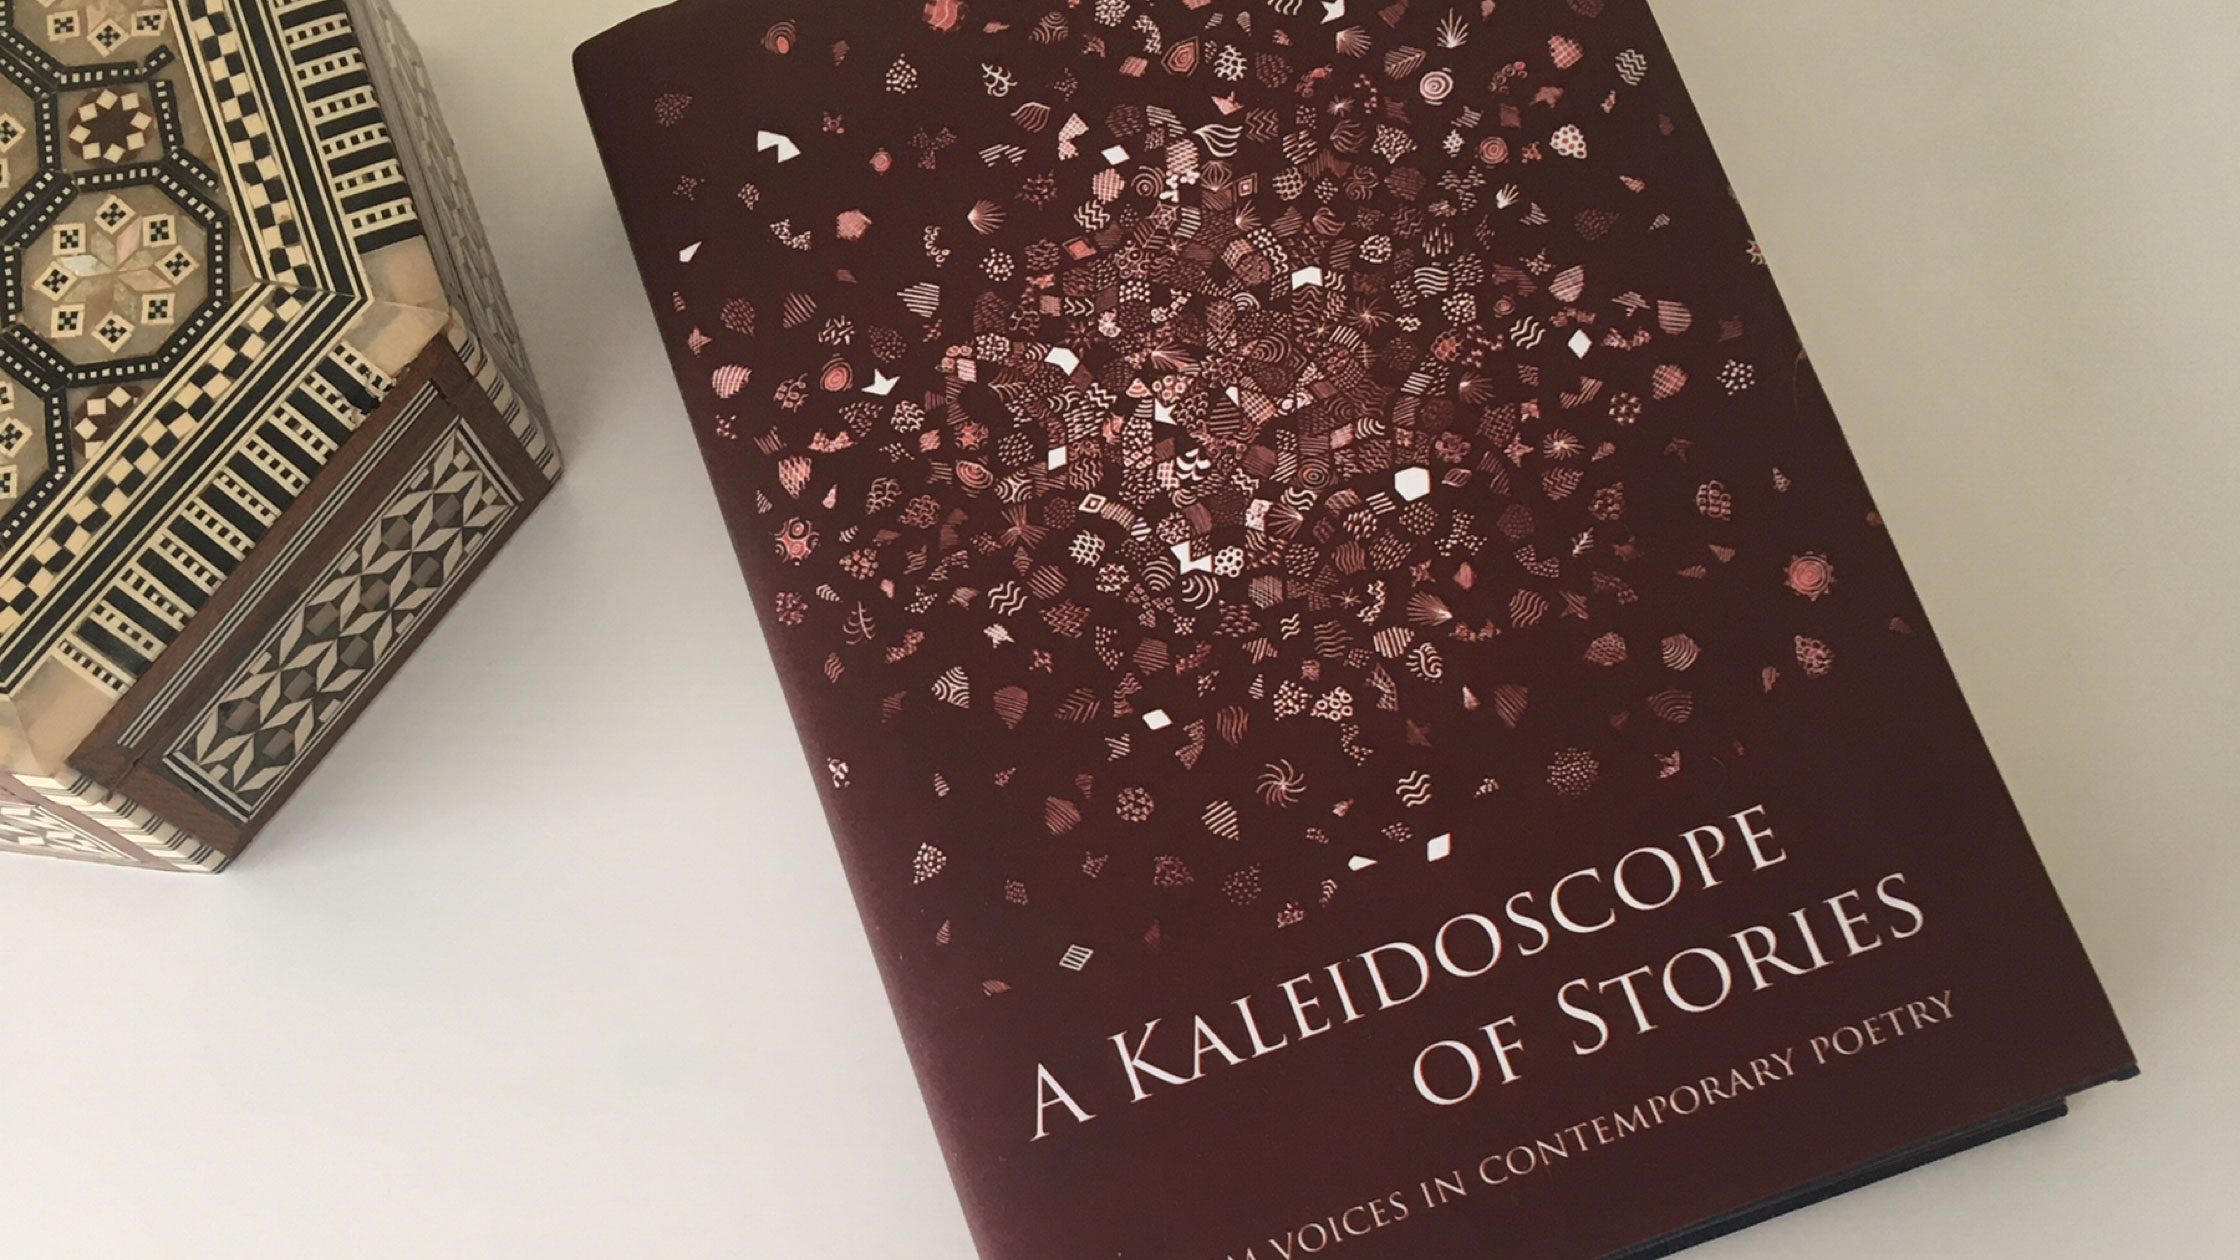 A Kaleidoscope of Stories, Muslim Voices in Contemporary Poetry – Book Review by Humera Khan, An-Nisa Society